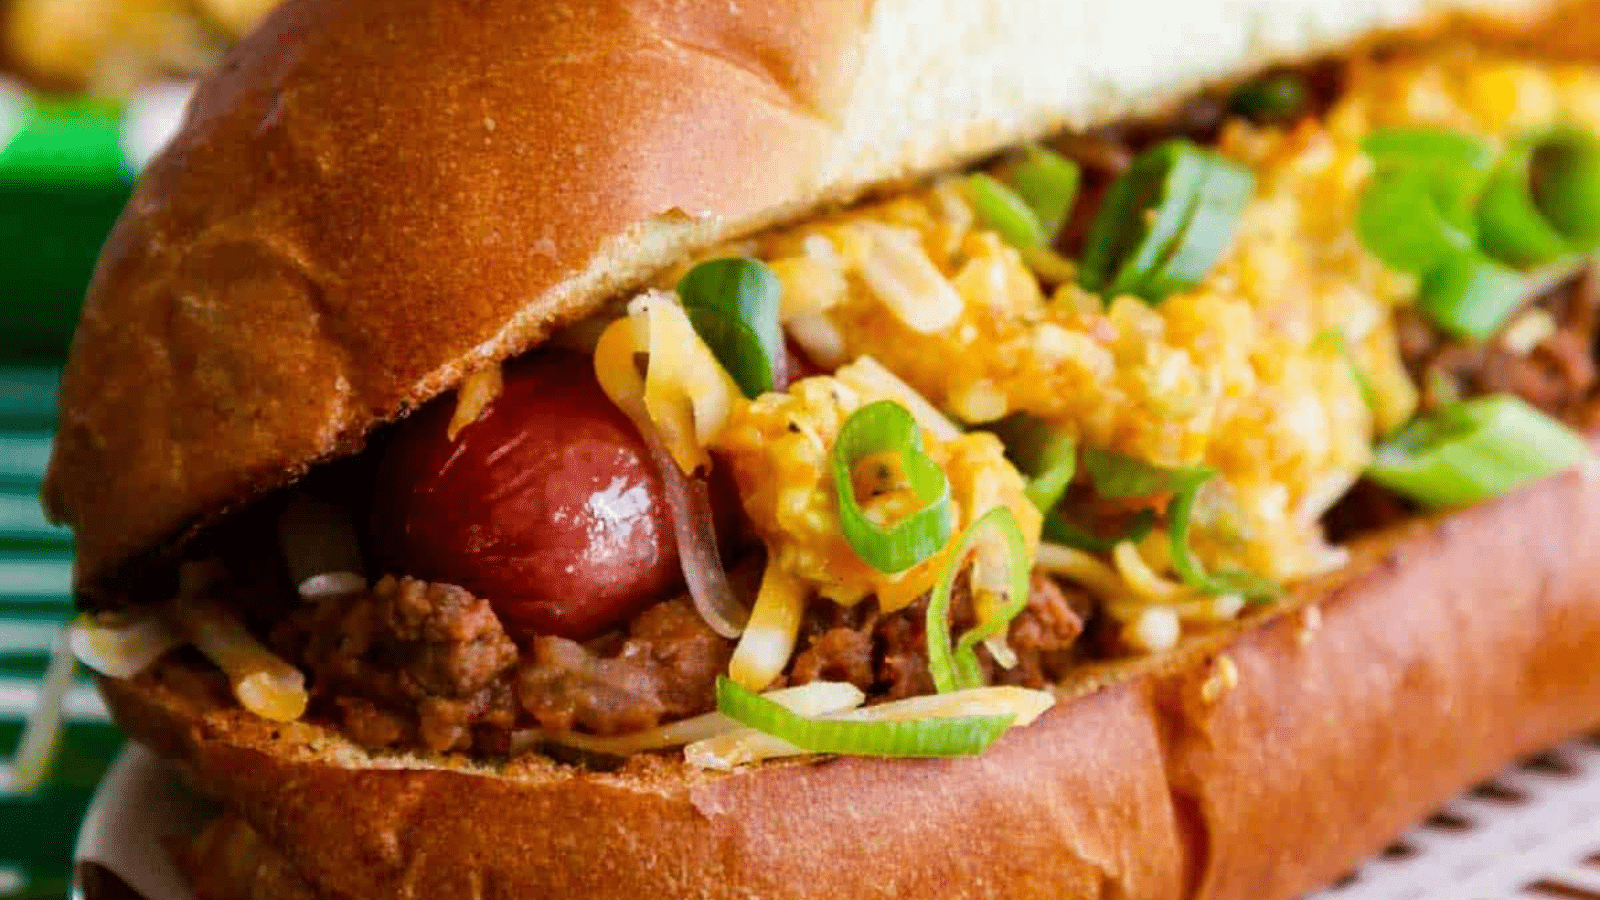 Close up of hot dog in bun topped with hot dog chili